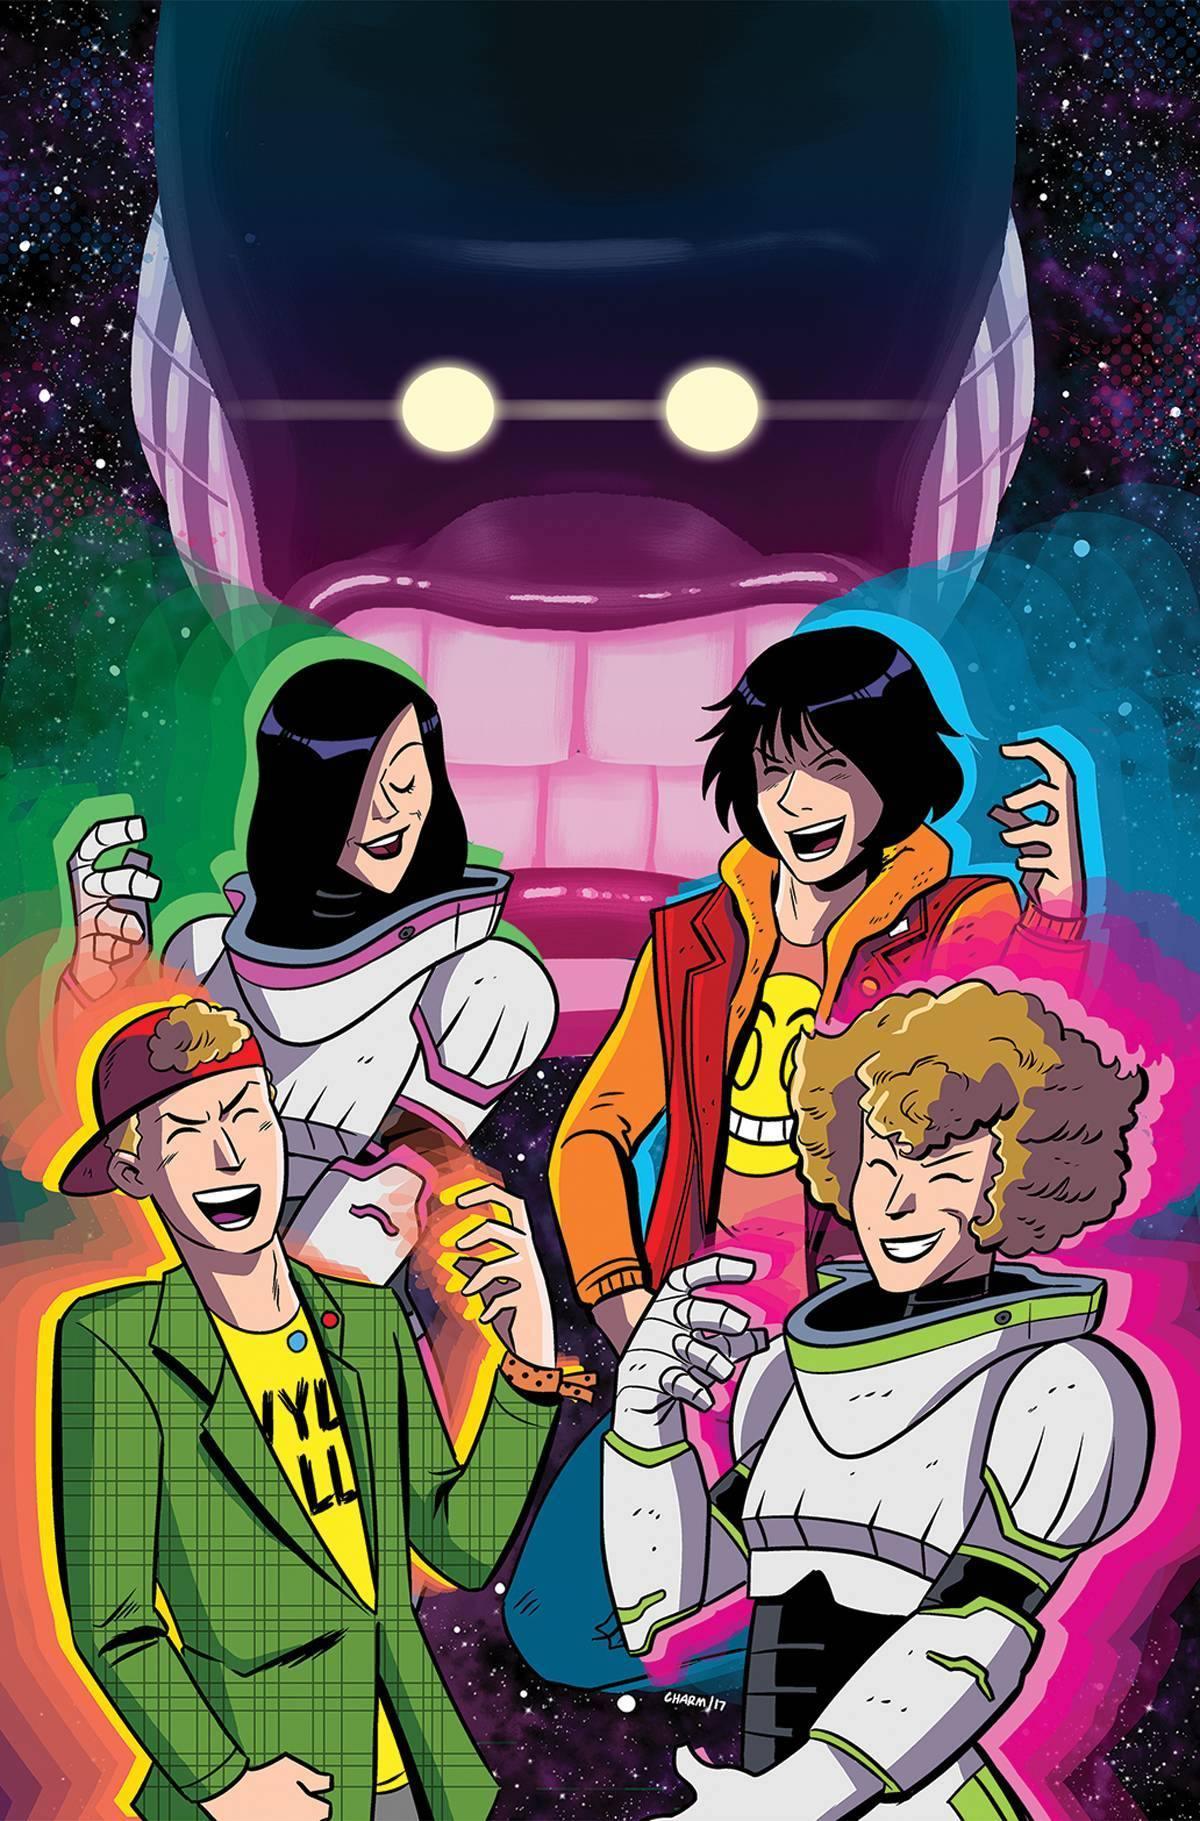 BILL & TED SAVE THE UNIVERSE #4 - Kings Comics